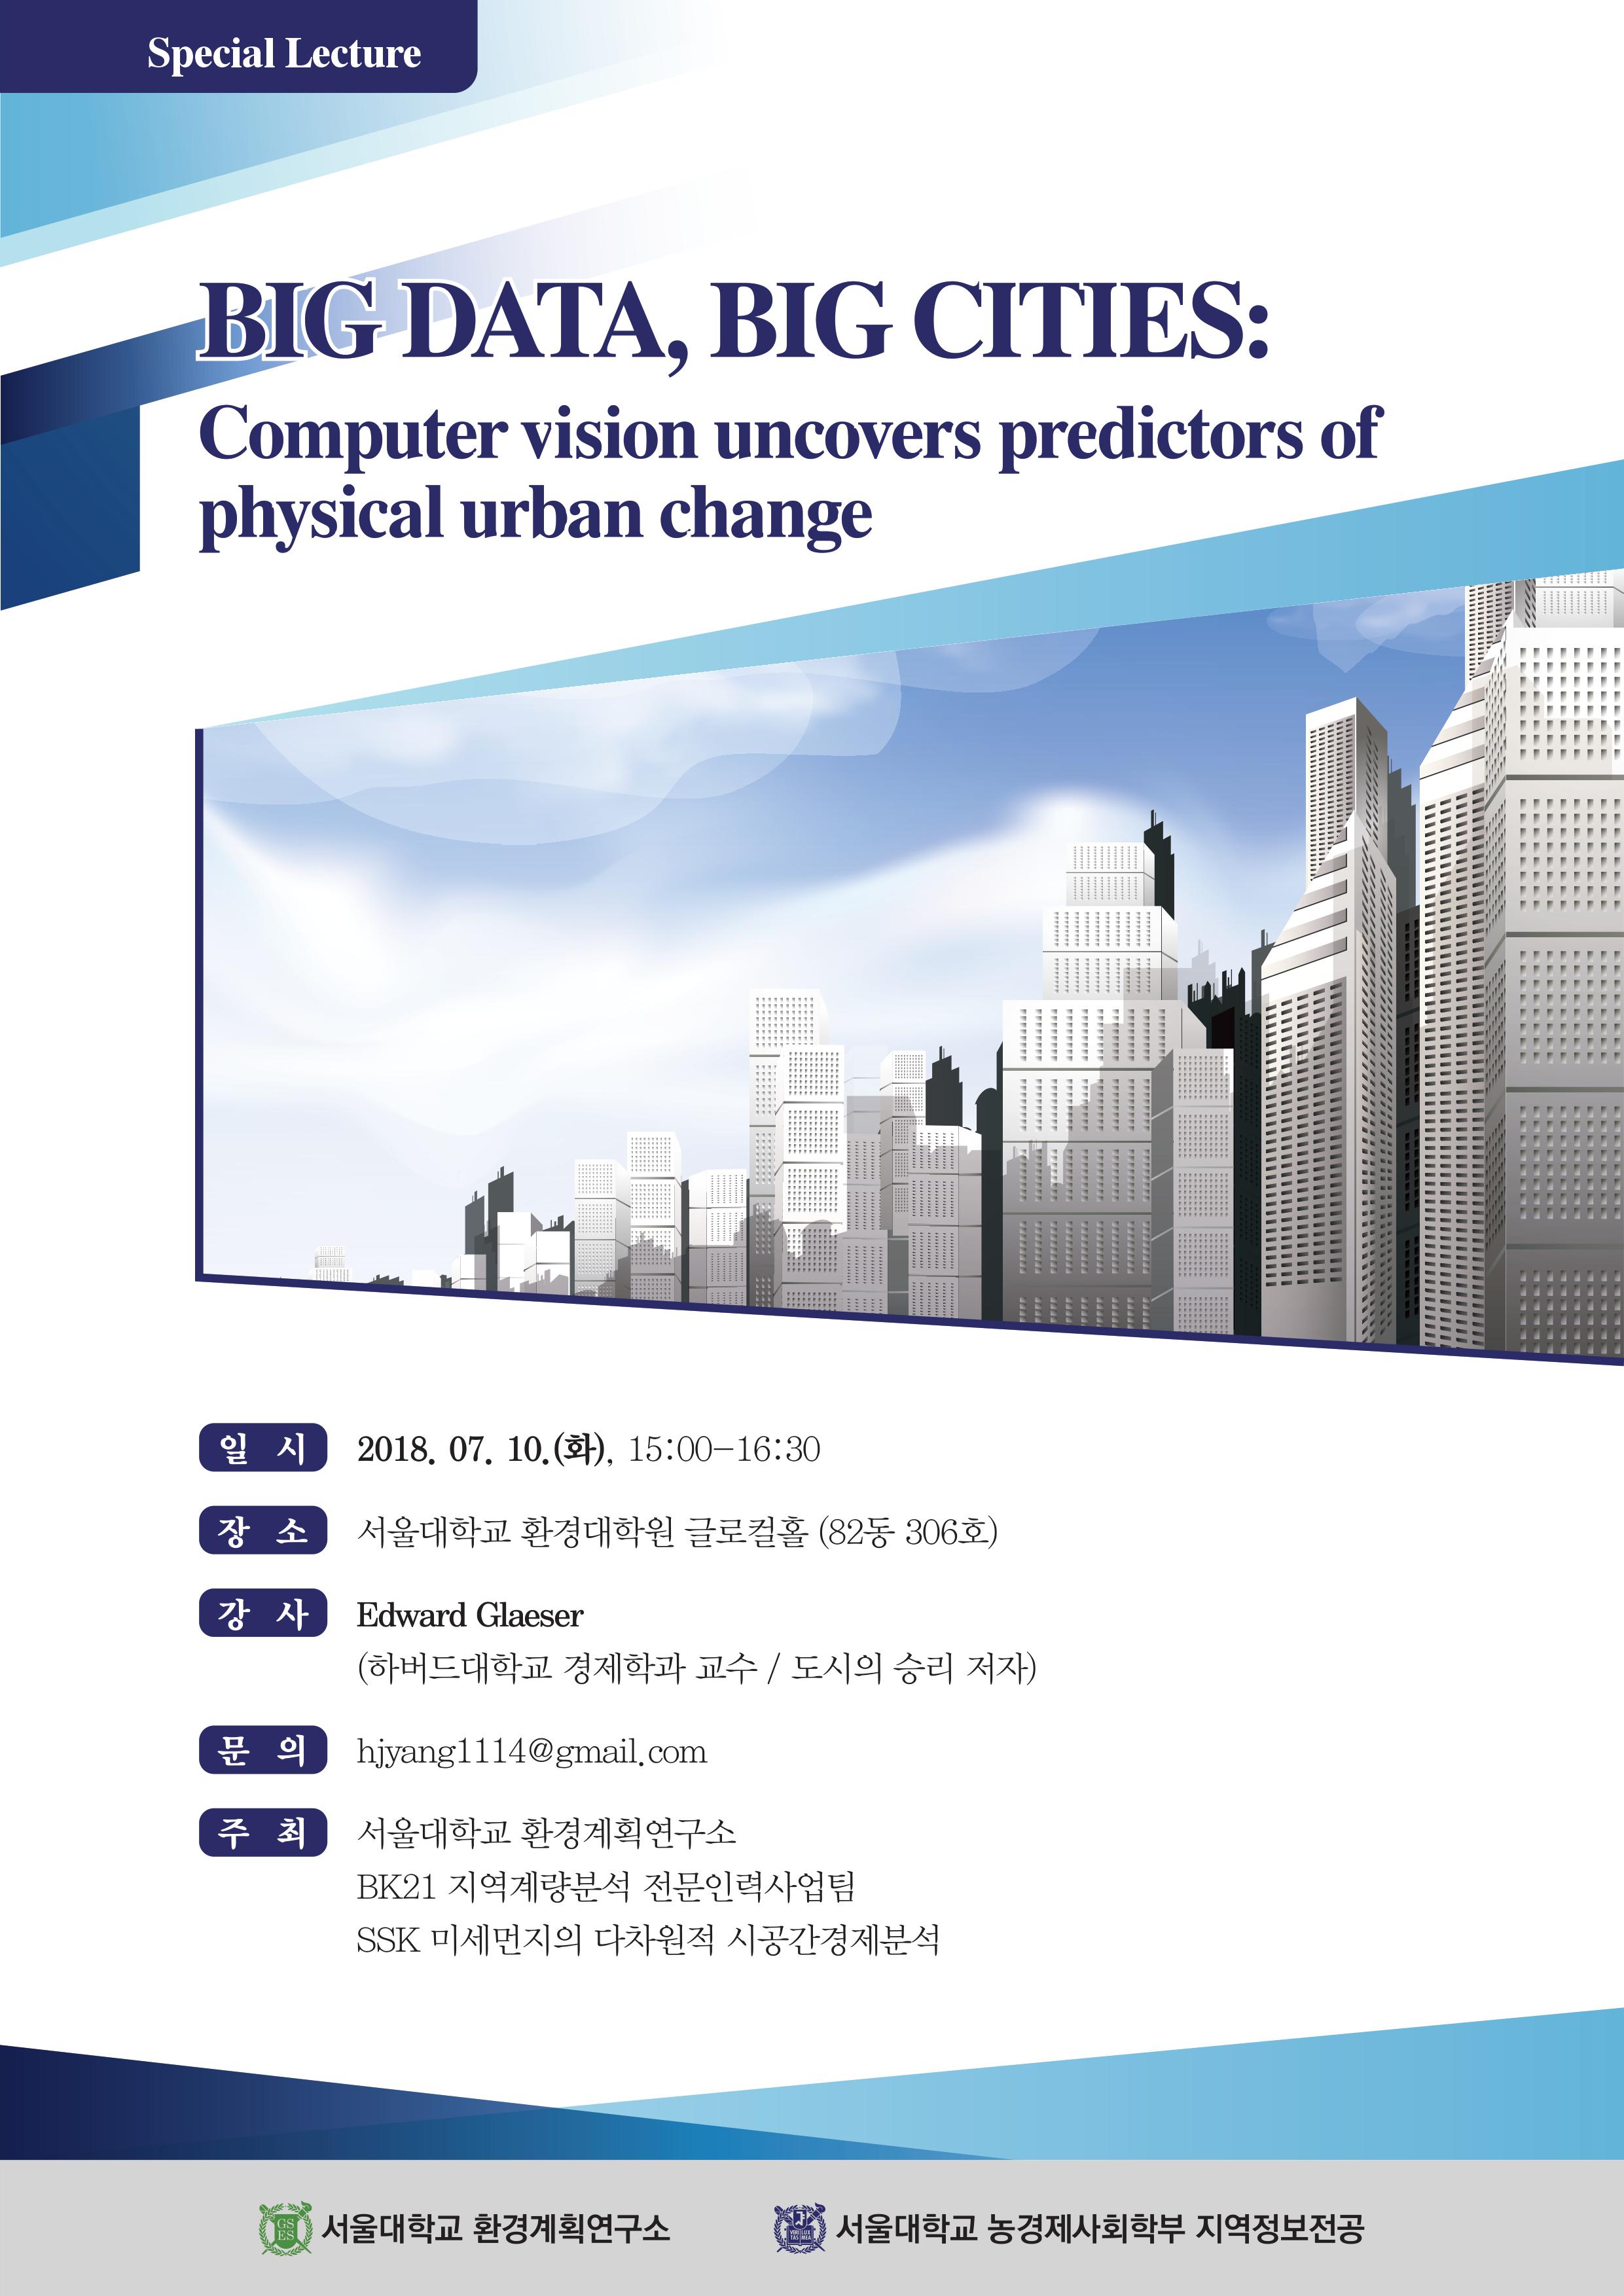 You are currently viewing [서울대학교] Big Data, Big City: Computer vision uncovers predictors of physical urban change 특강 세미나 개최